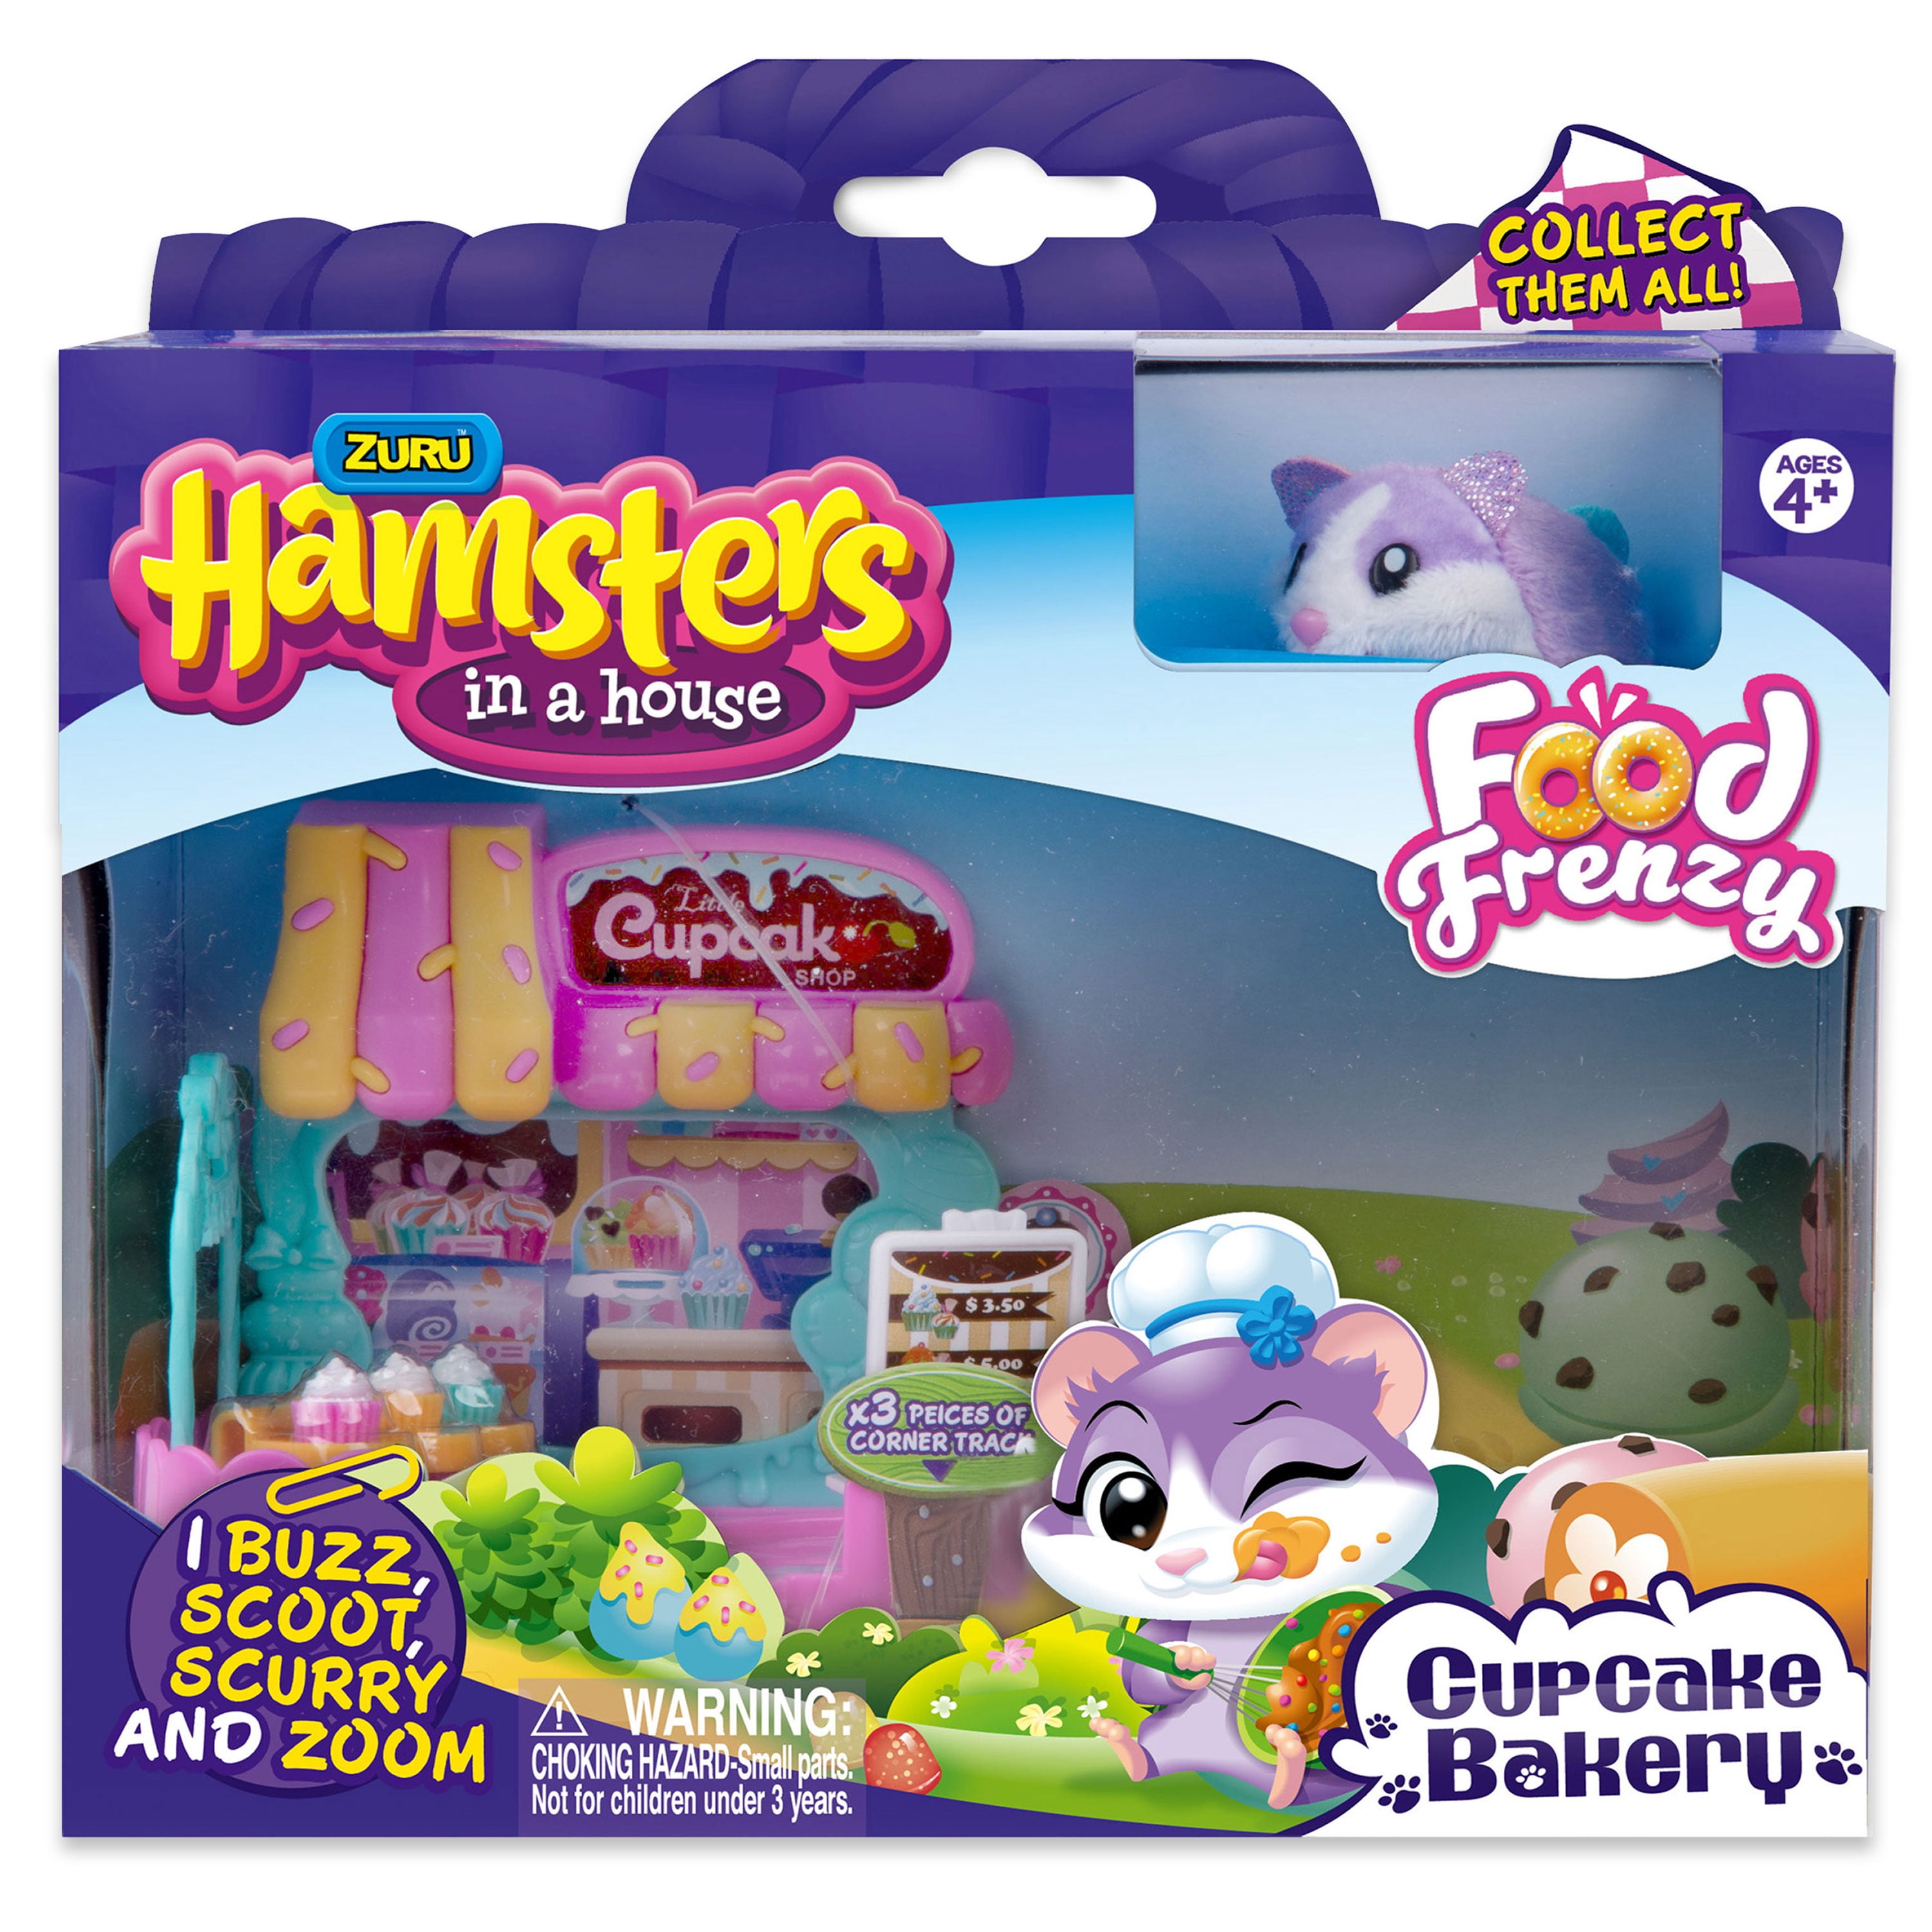 ZURU Hamsters in a House Toy for sale online 5101 